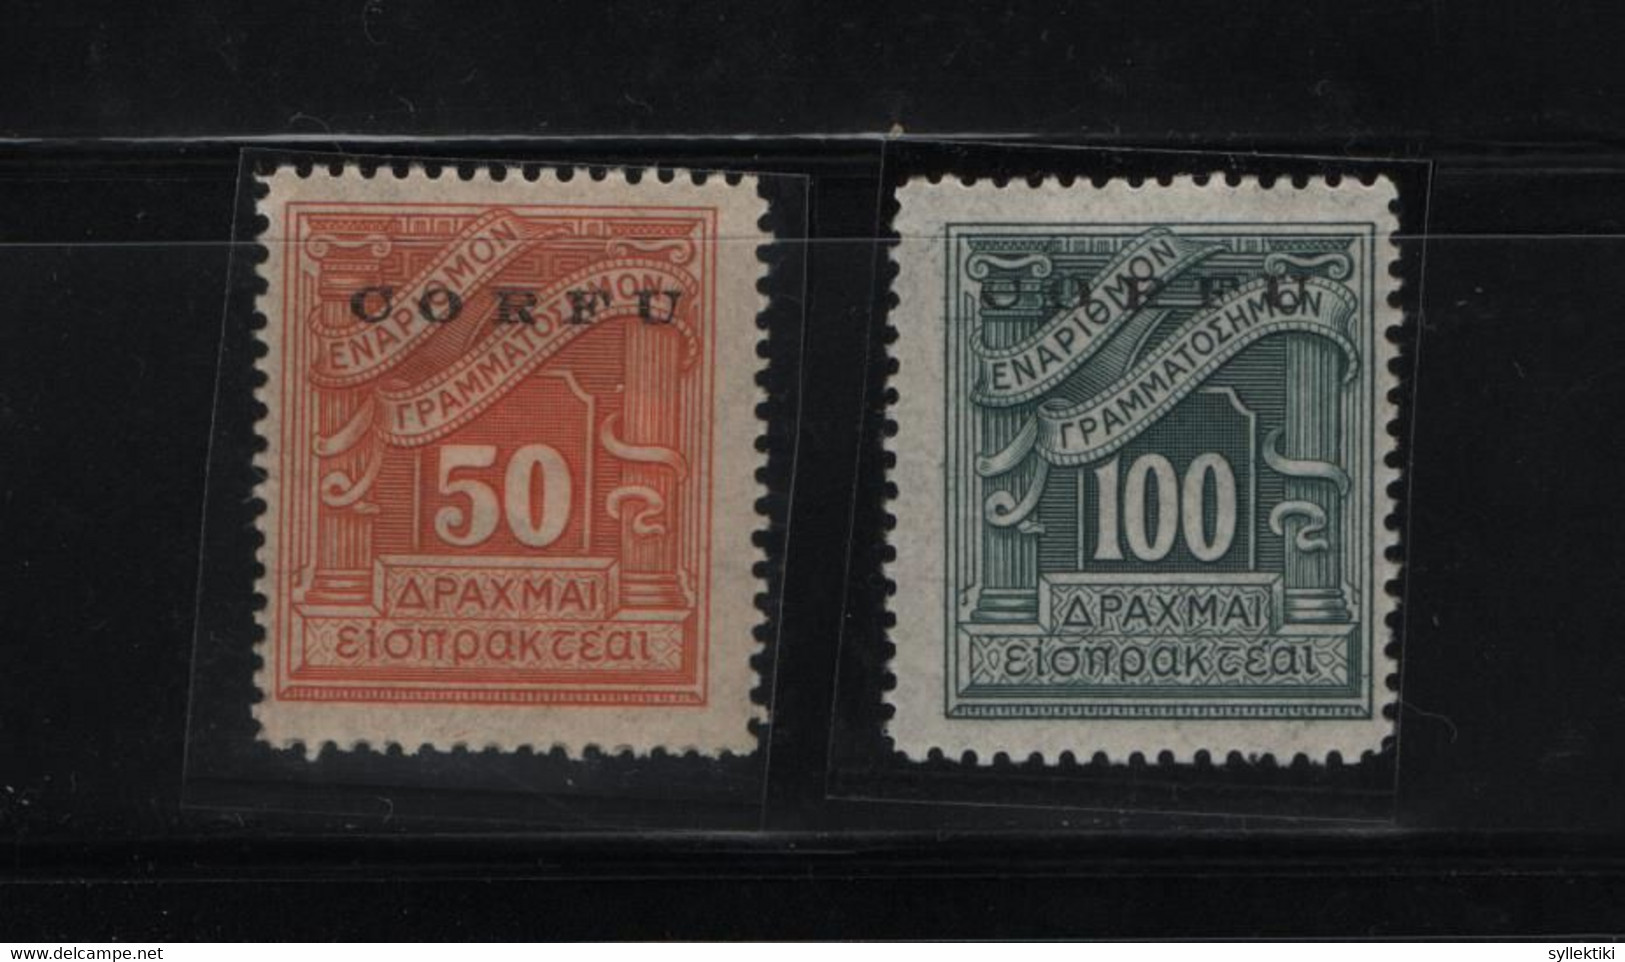 GREECE 1941 CORFU OVERPRINT ON POSTAGE DUE 2 DIFFERENT MNH STAMPS  HELLAS No 44 - 45 AND VALUE  EURO 2320.00 - Ionian Islands